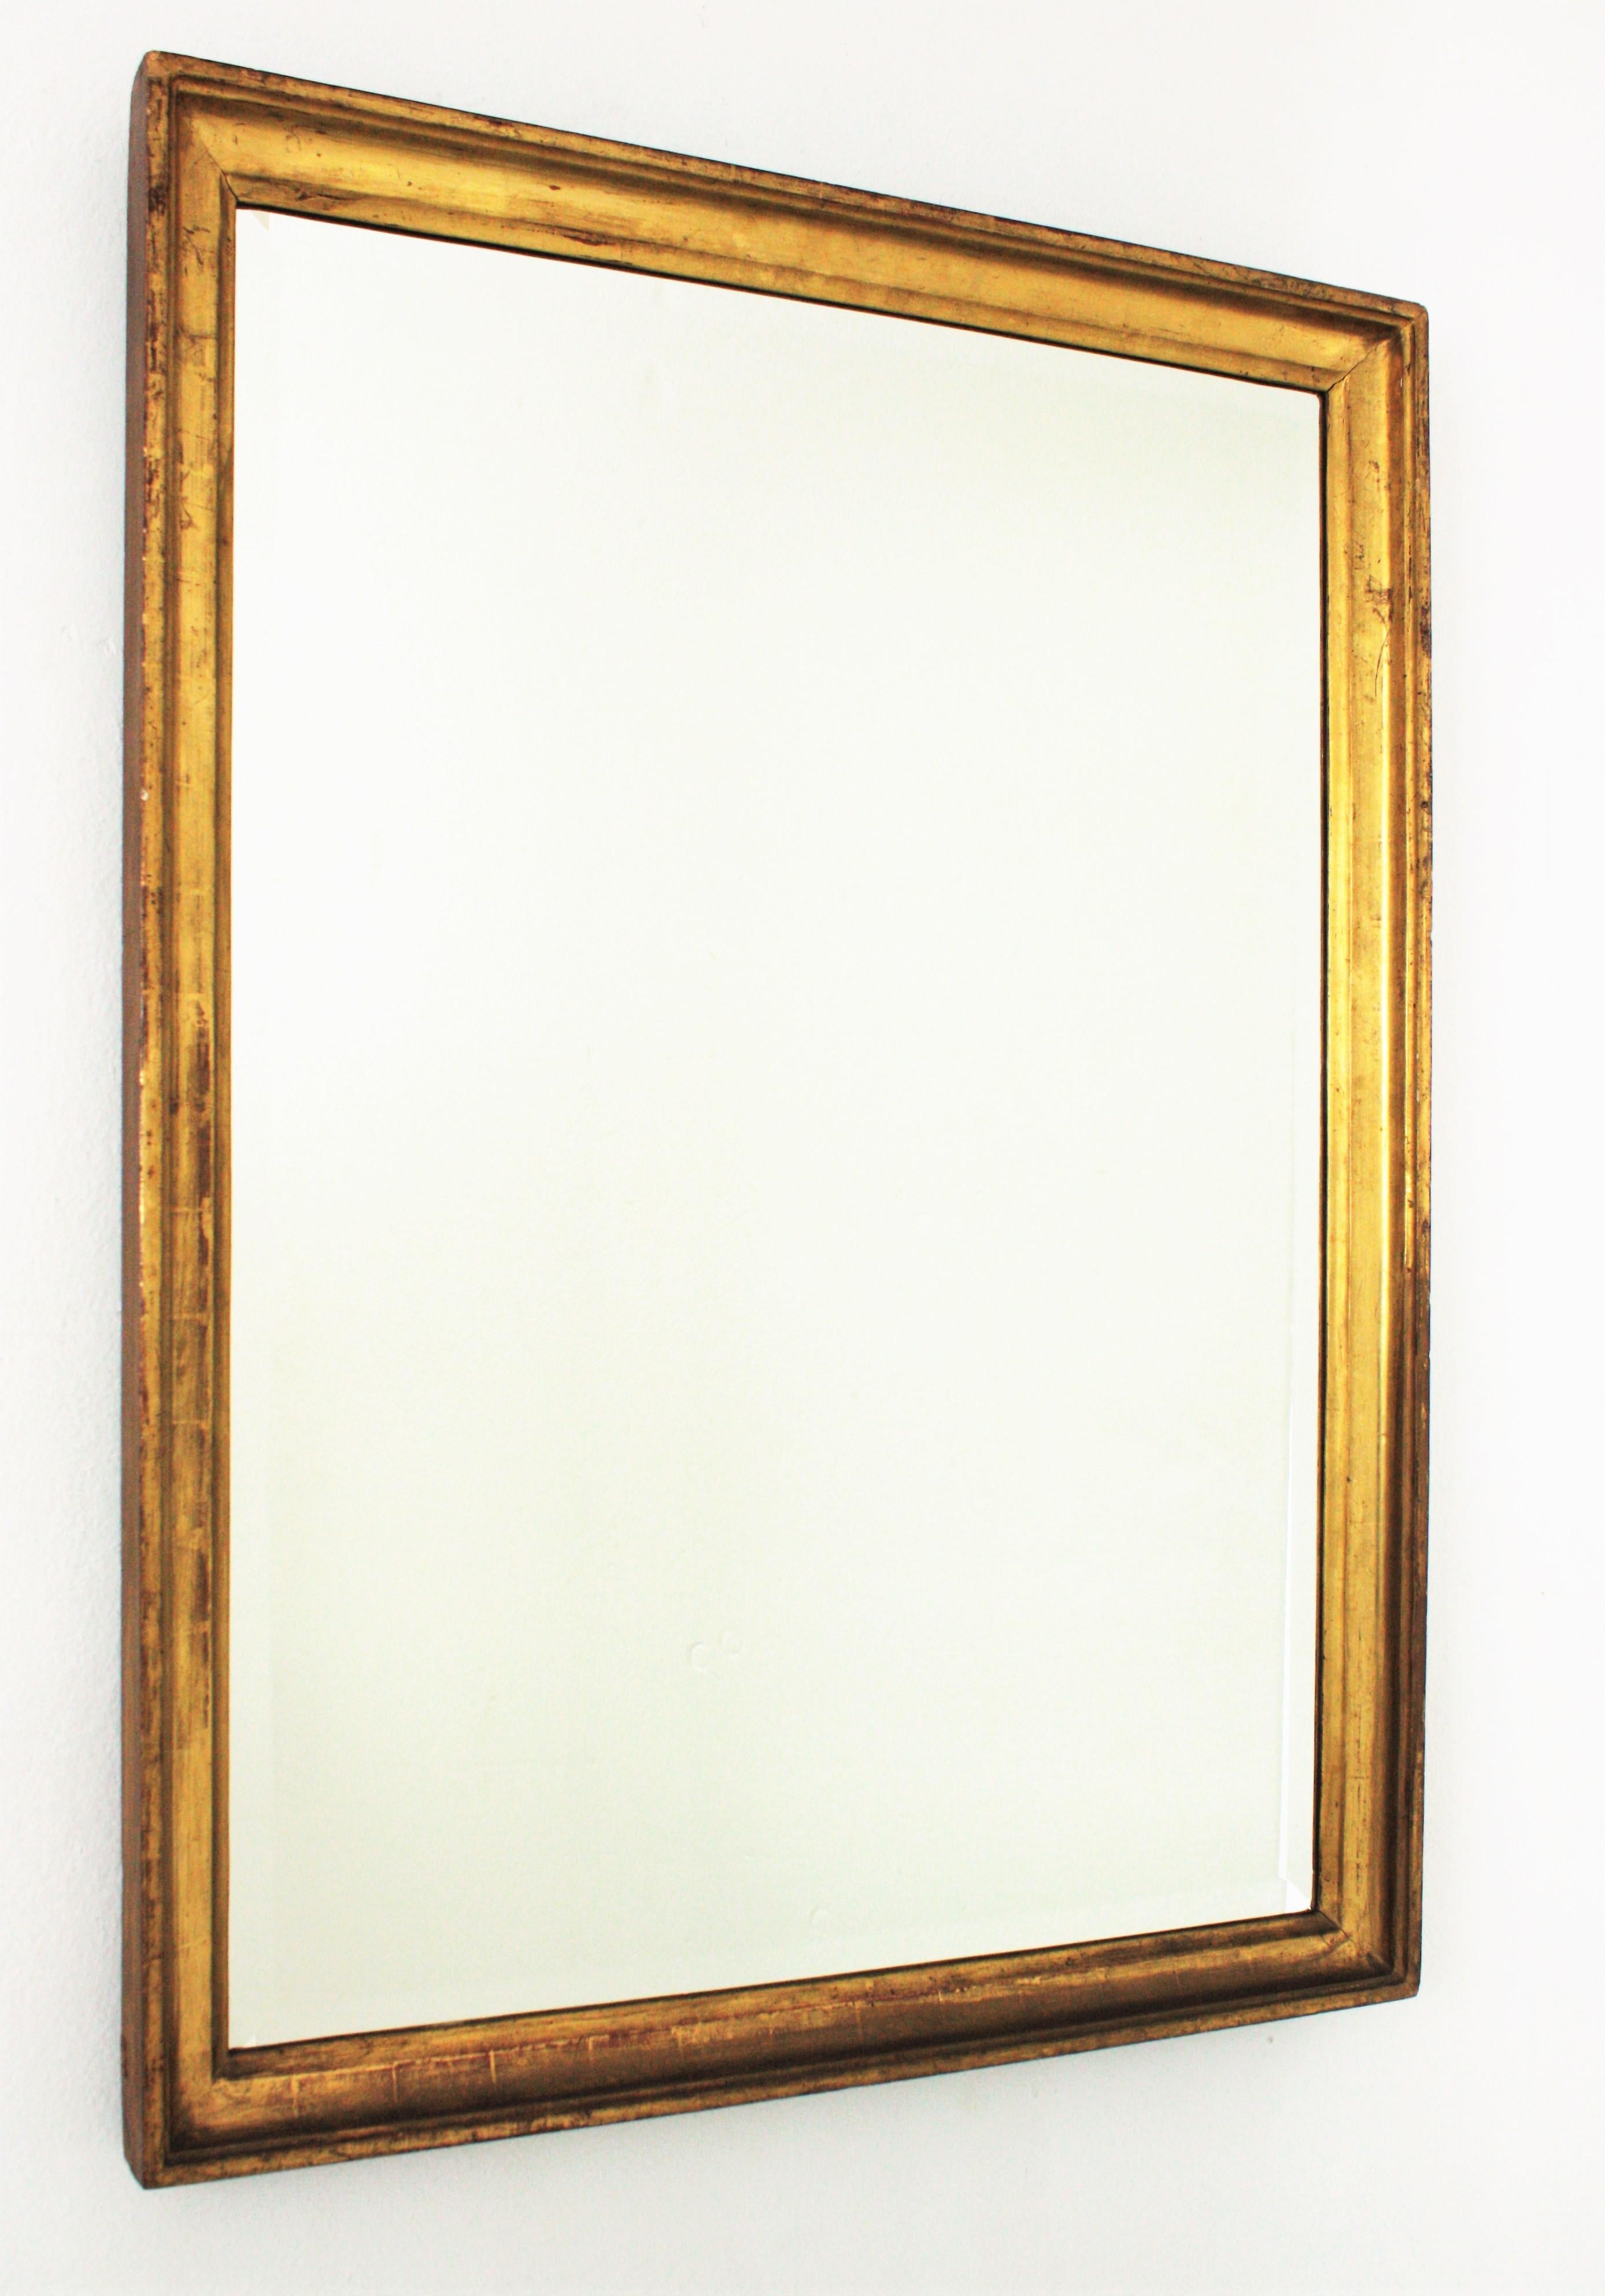 Elegant Spanish 19th century gold leaf giltwood rectangular mirror with beveled glass.
Empire style.
Made of carved wood, gesso and 24-karat gold leaf finish. It has a nice aged patina.
It will be a good choice for any bedroom, bathroom, dressing